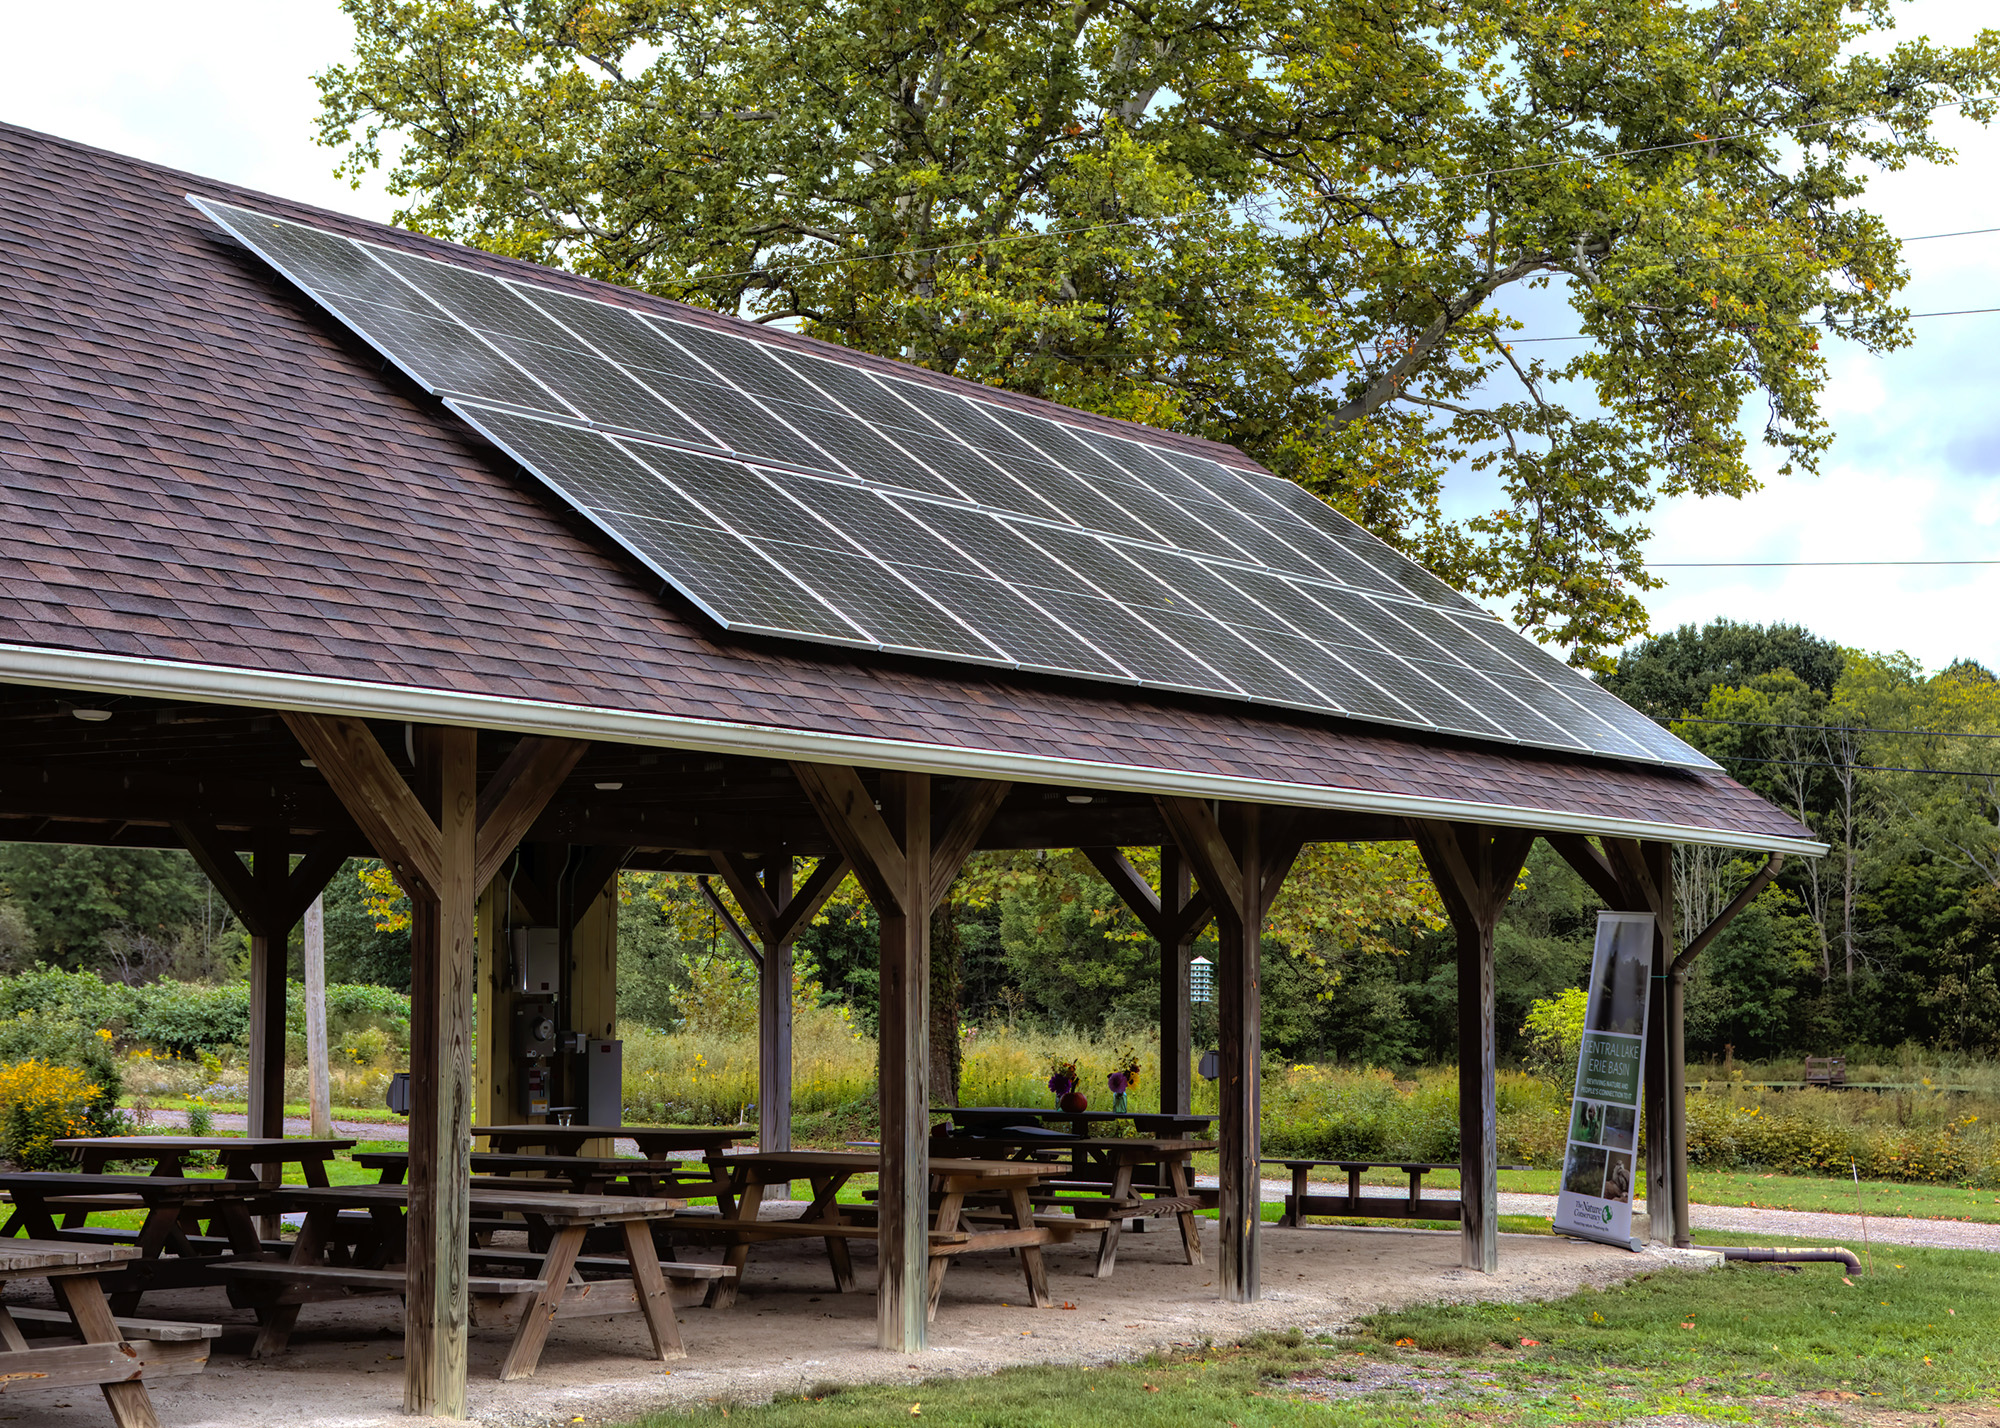 Solar panels installed on the roof of a picnic shelter.